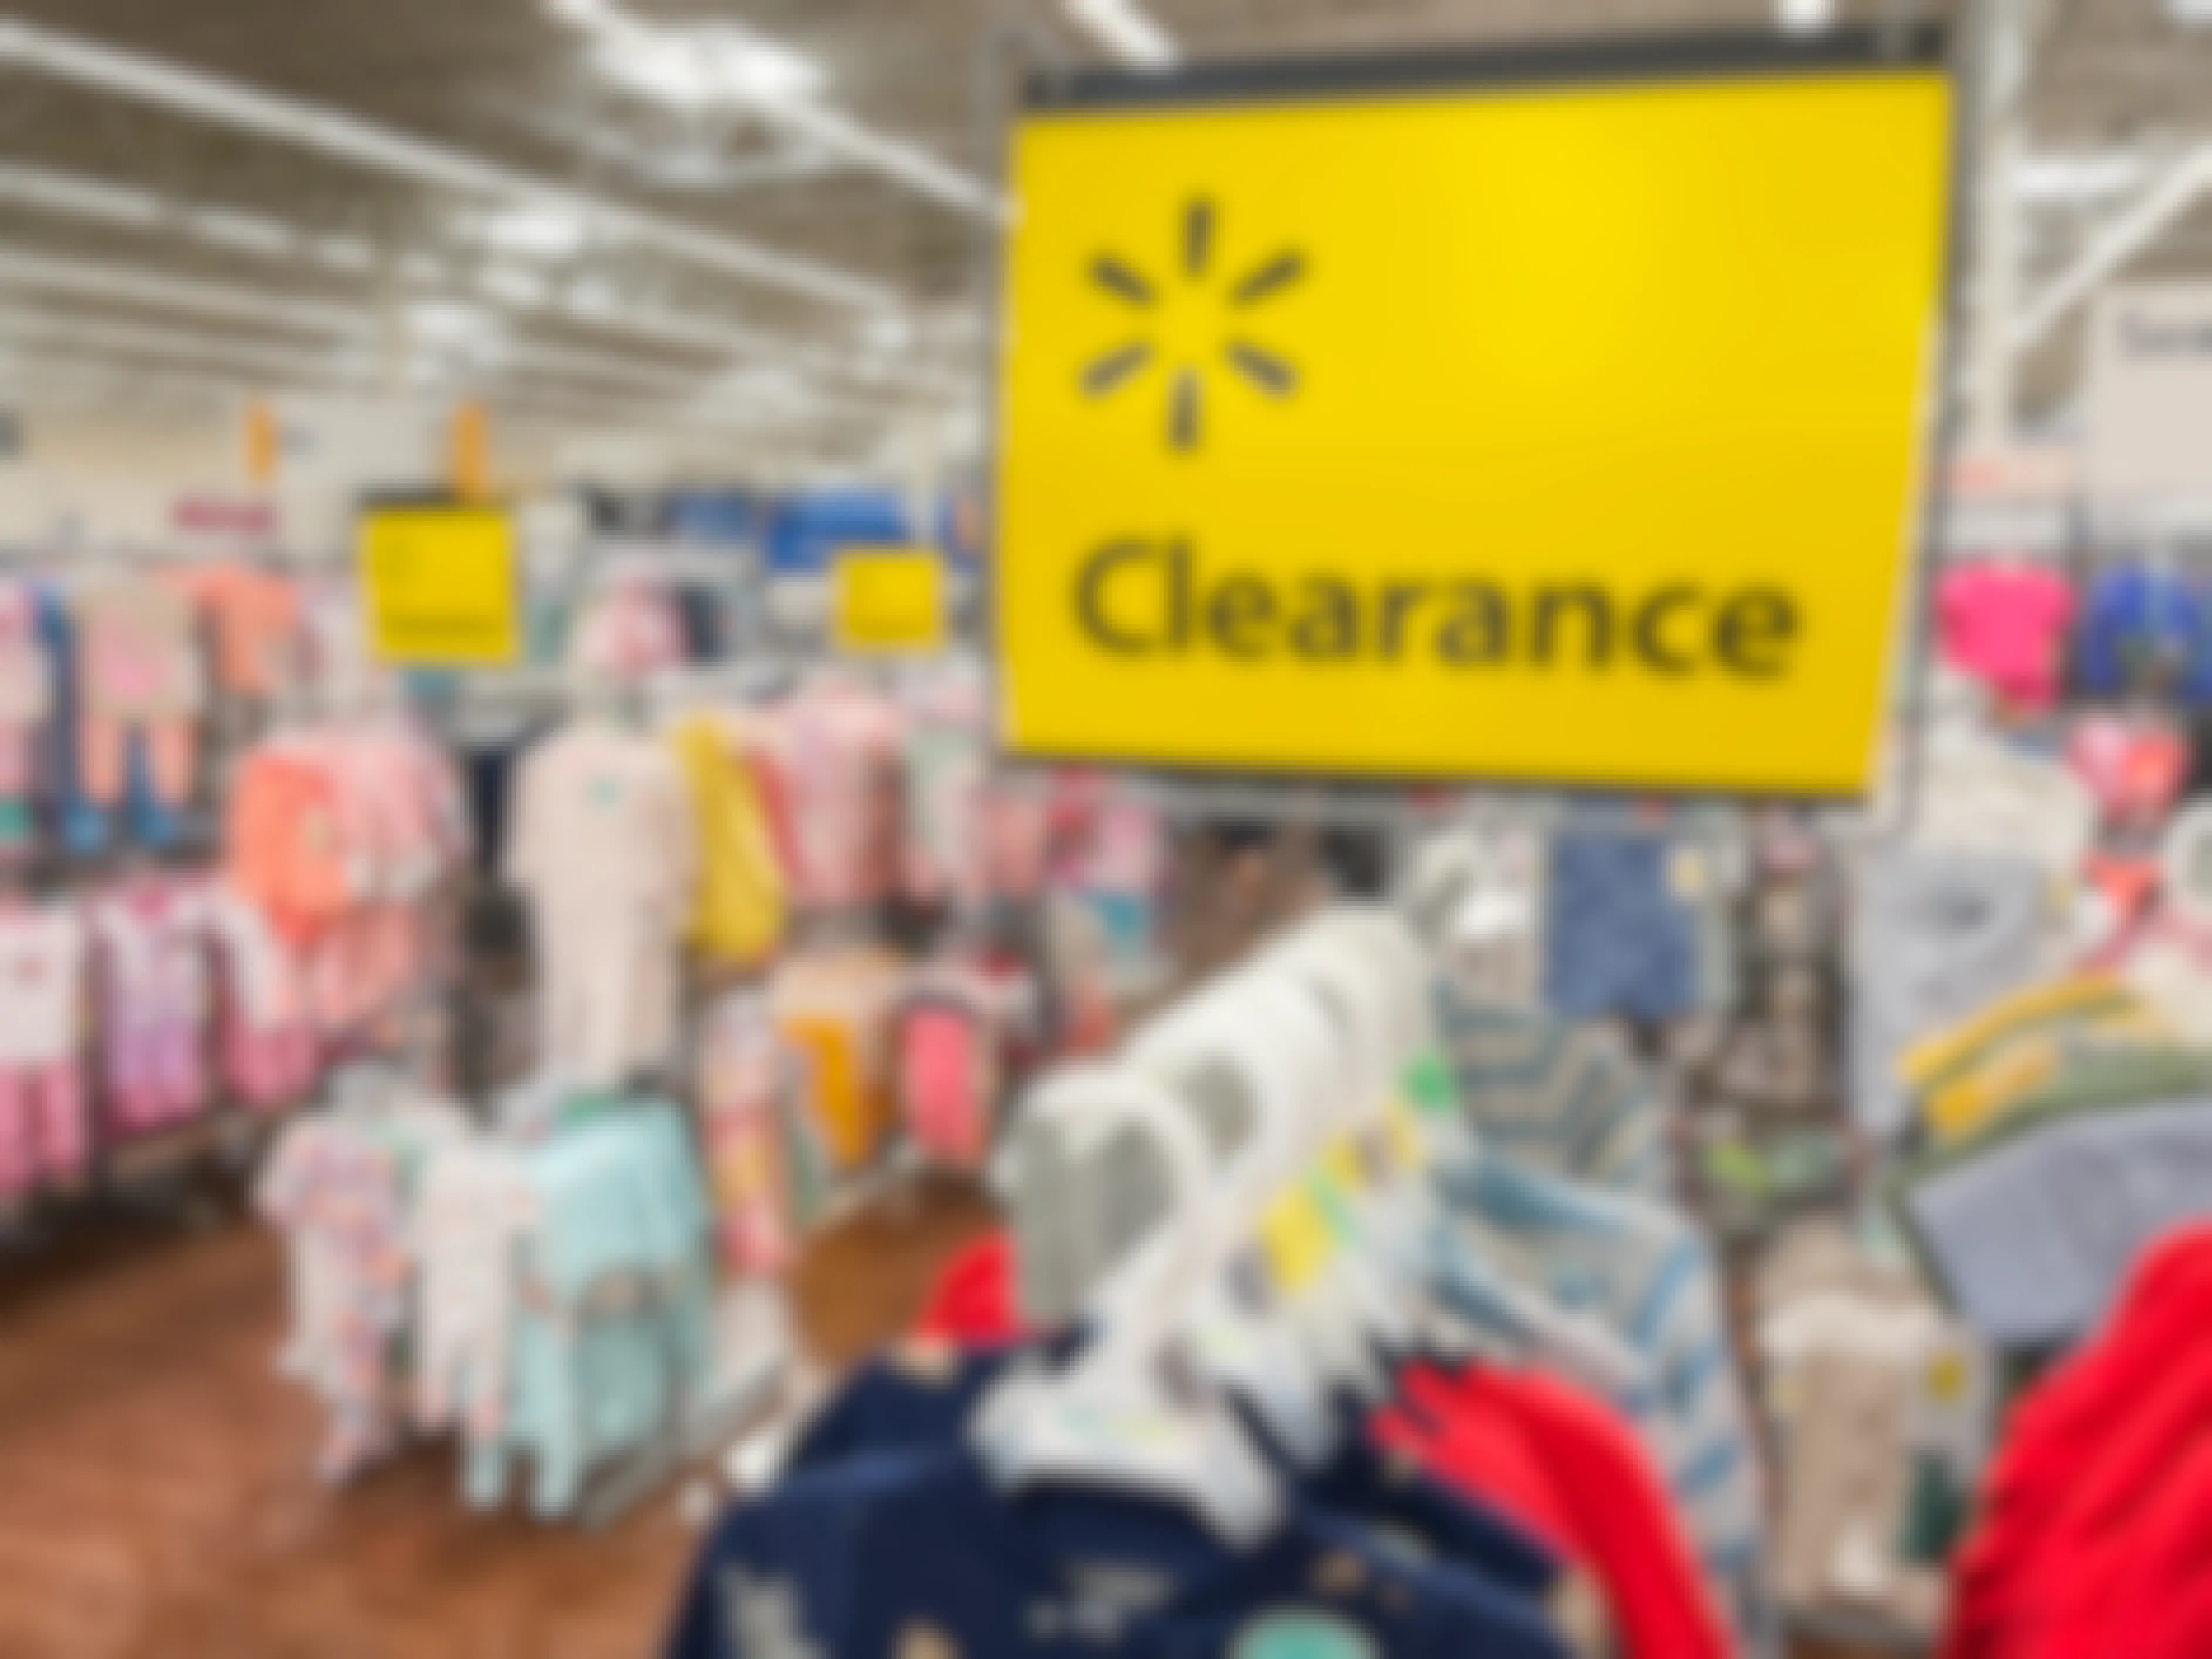 A clearance sign in the clearance section for kids pajamas